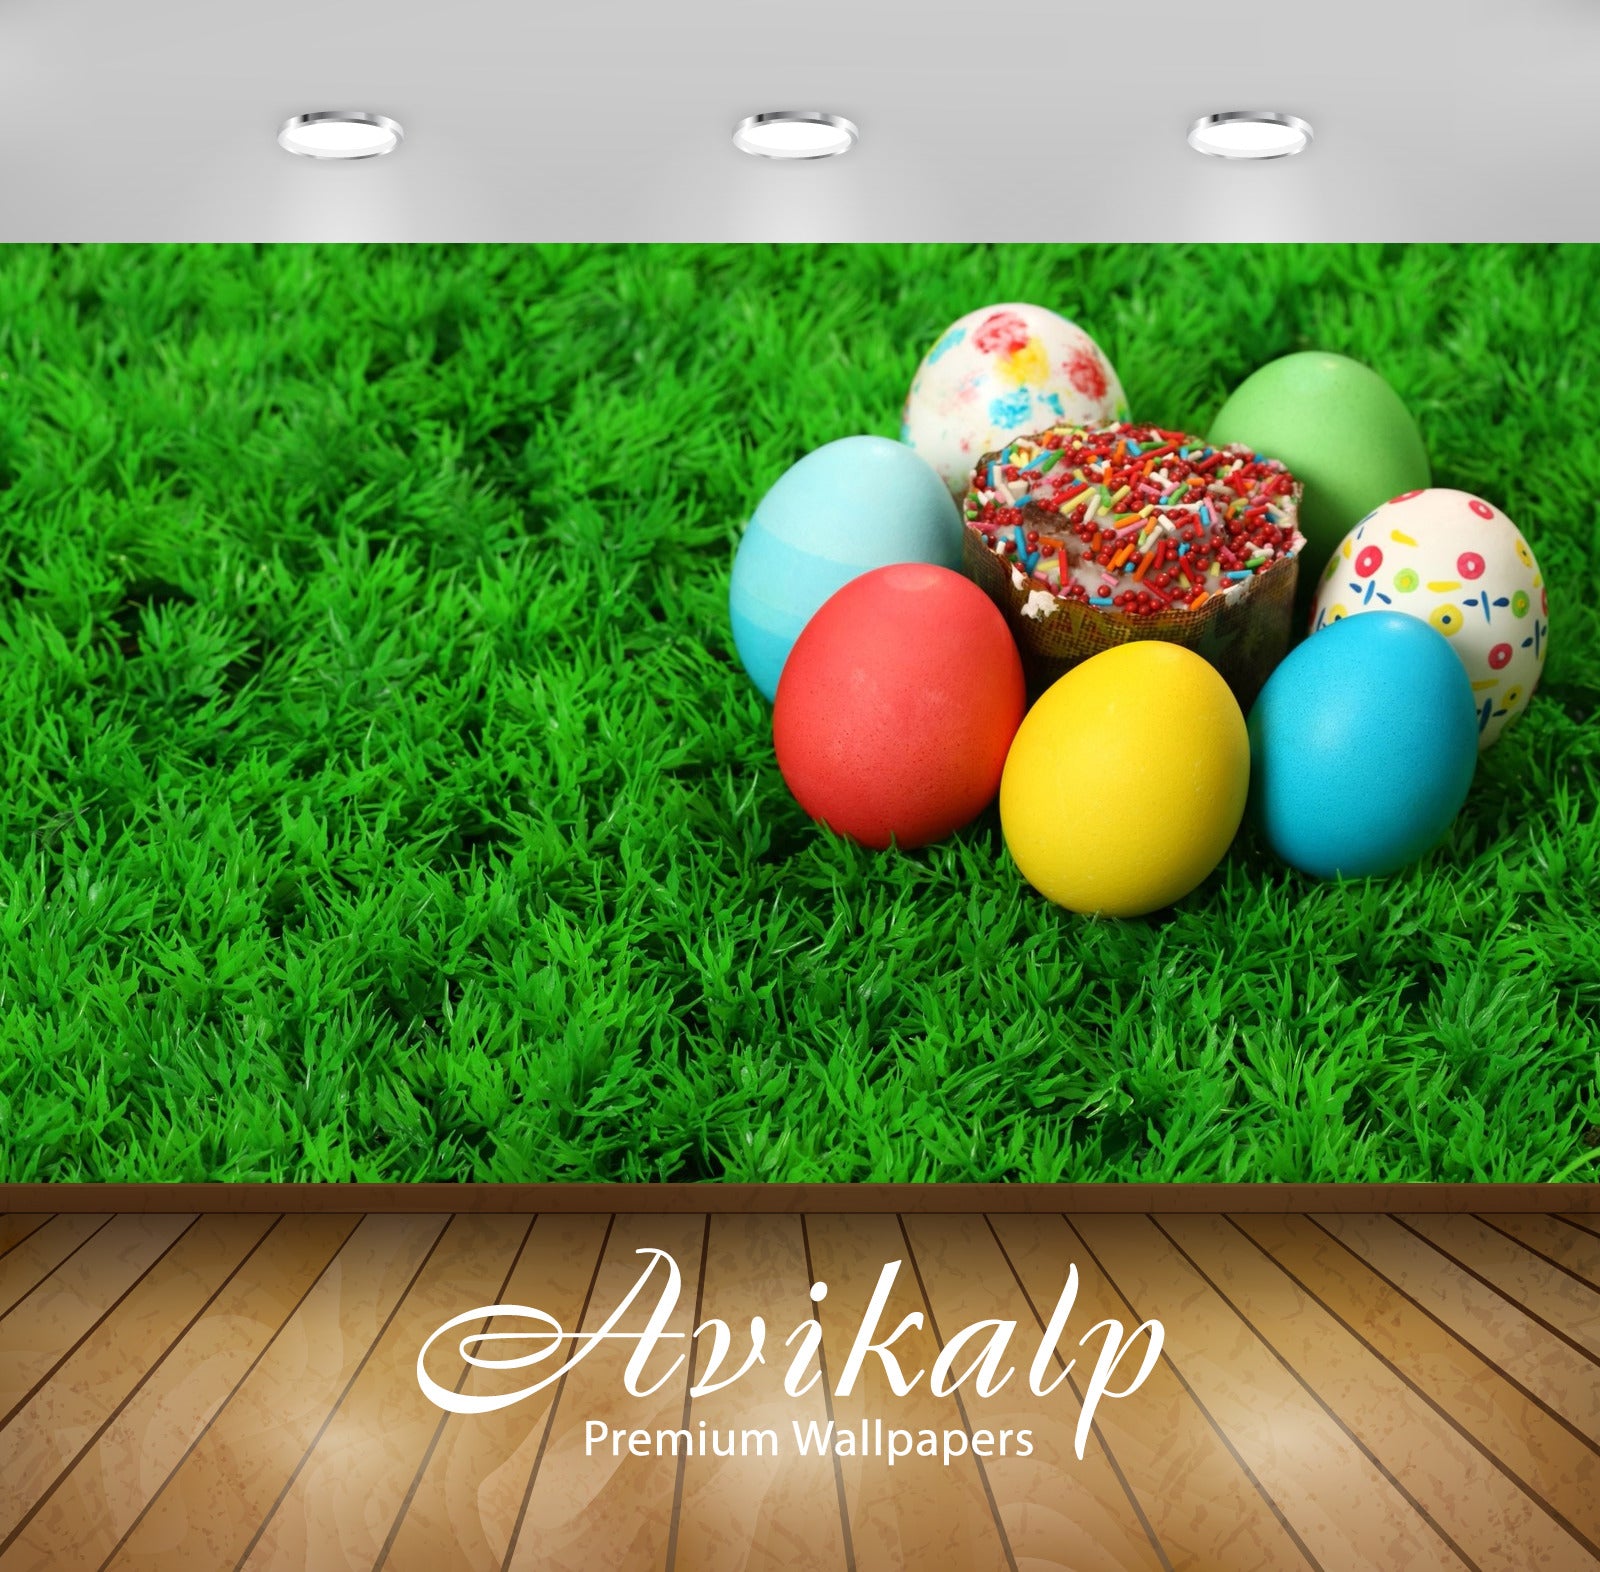 Avikalp Exclusive Artistic Egg AWI1073 HD Wallpapers for Living room, Hall, Kids Room, Kitchen, TV B